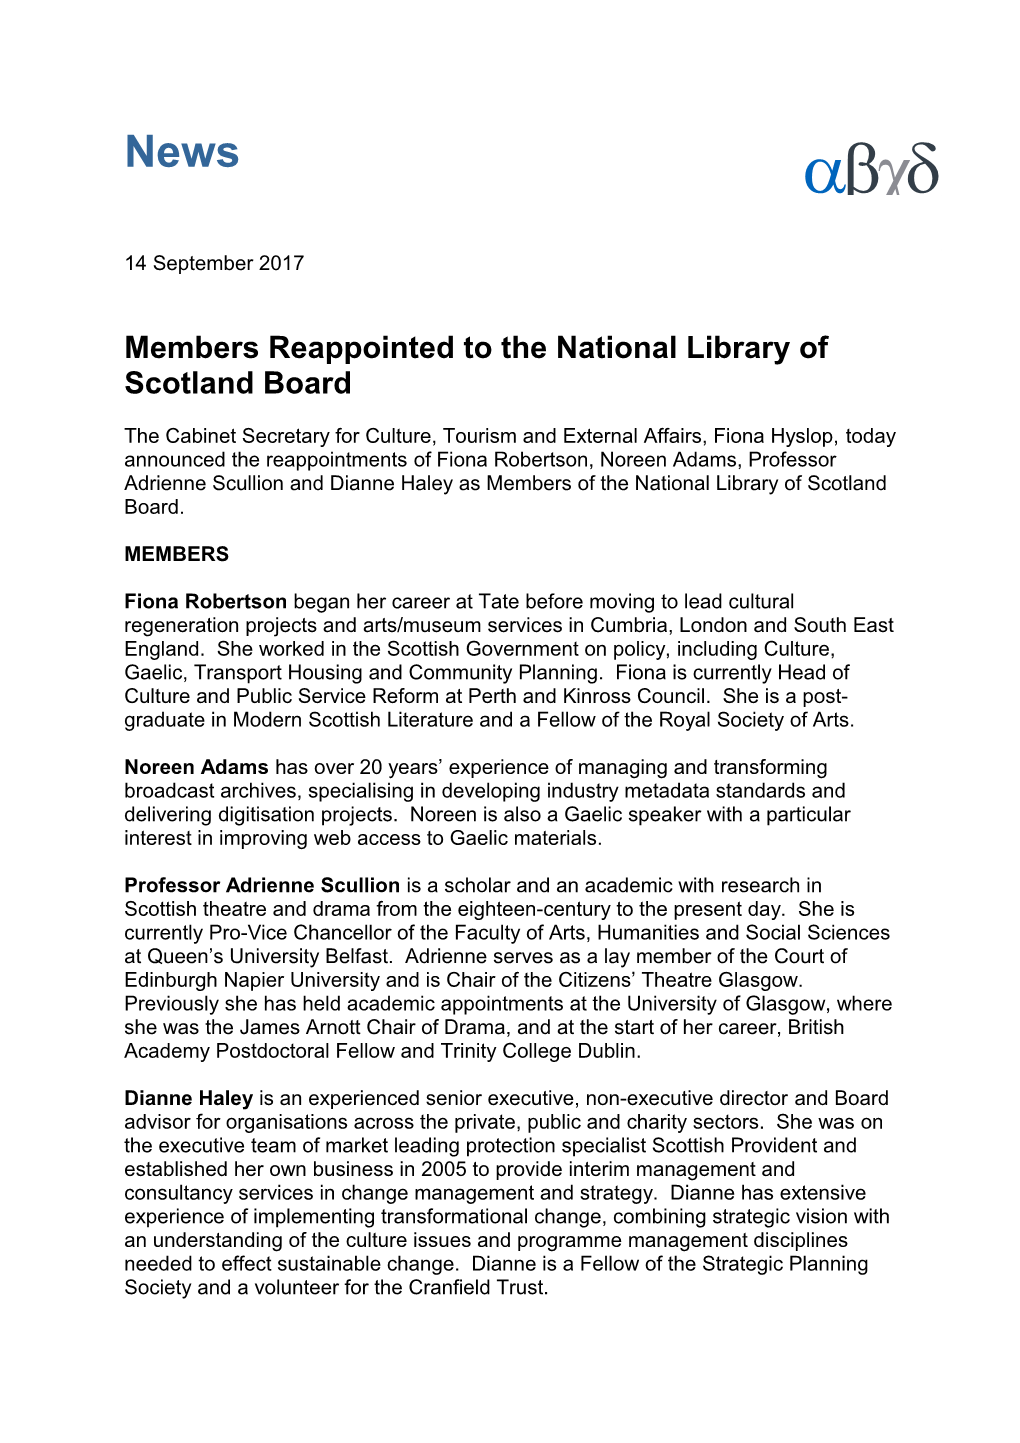 Members Reappointed to the National Library of Scotland Board